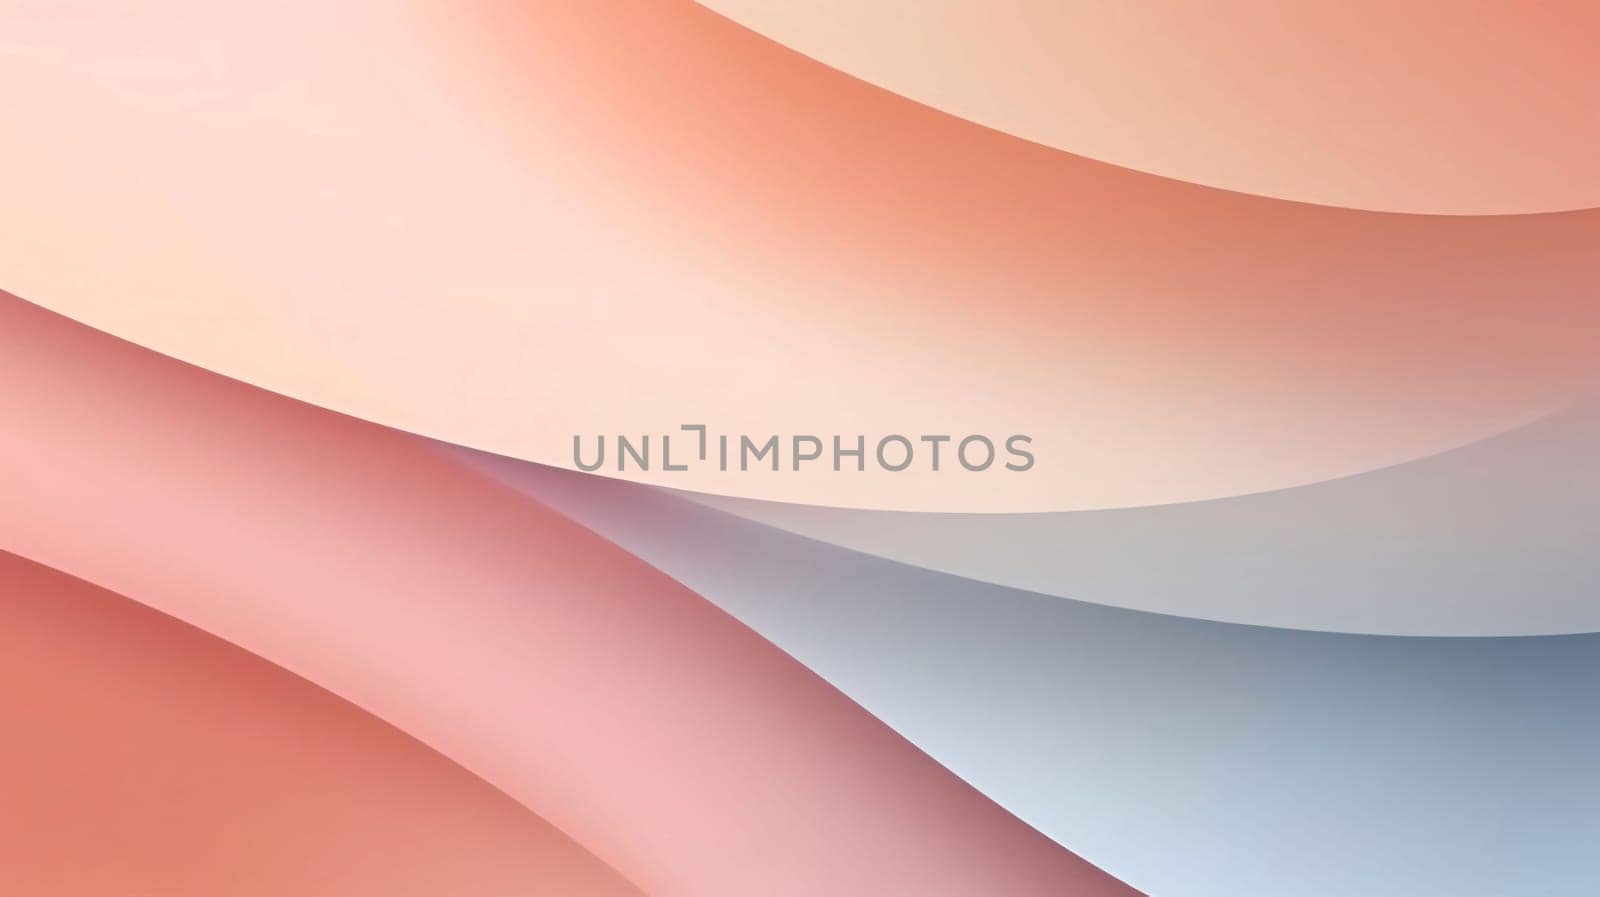 Abstract background design: Abstract background of curved lines in pink, blue and orange colors.